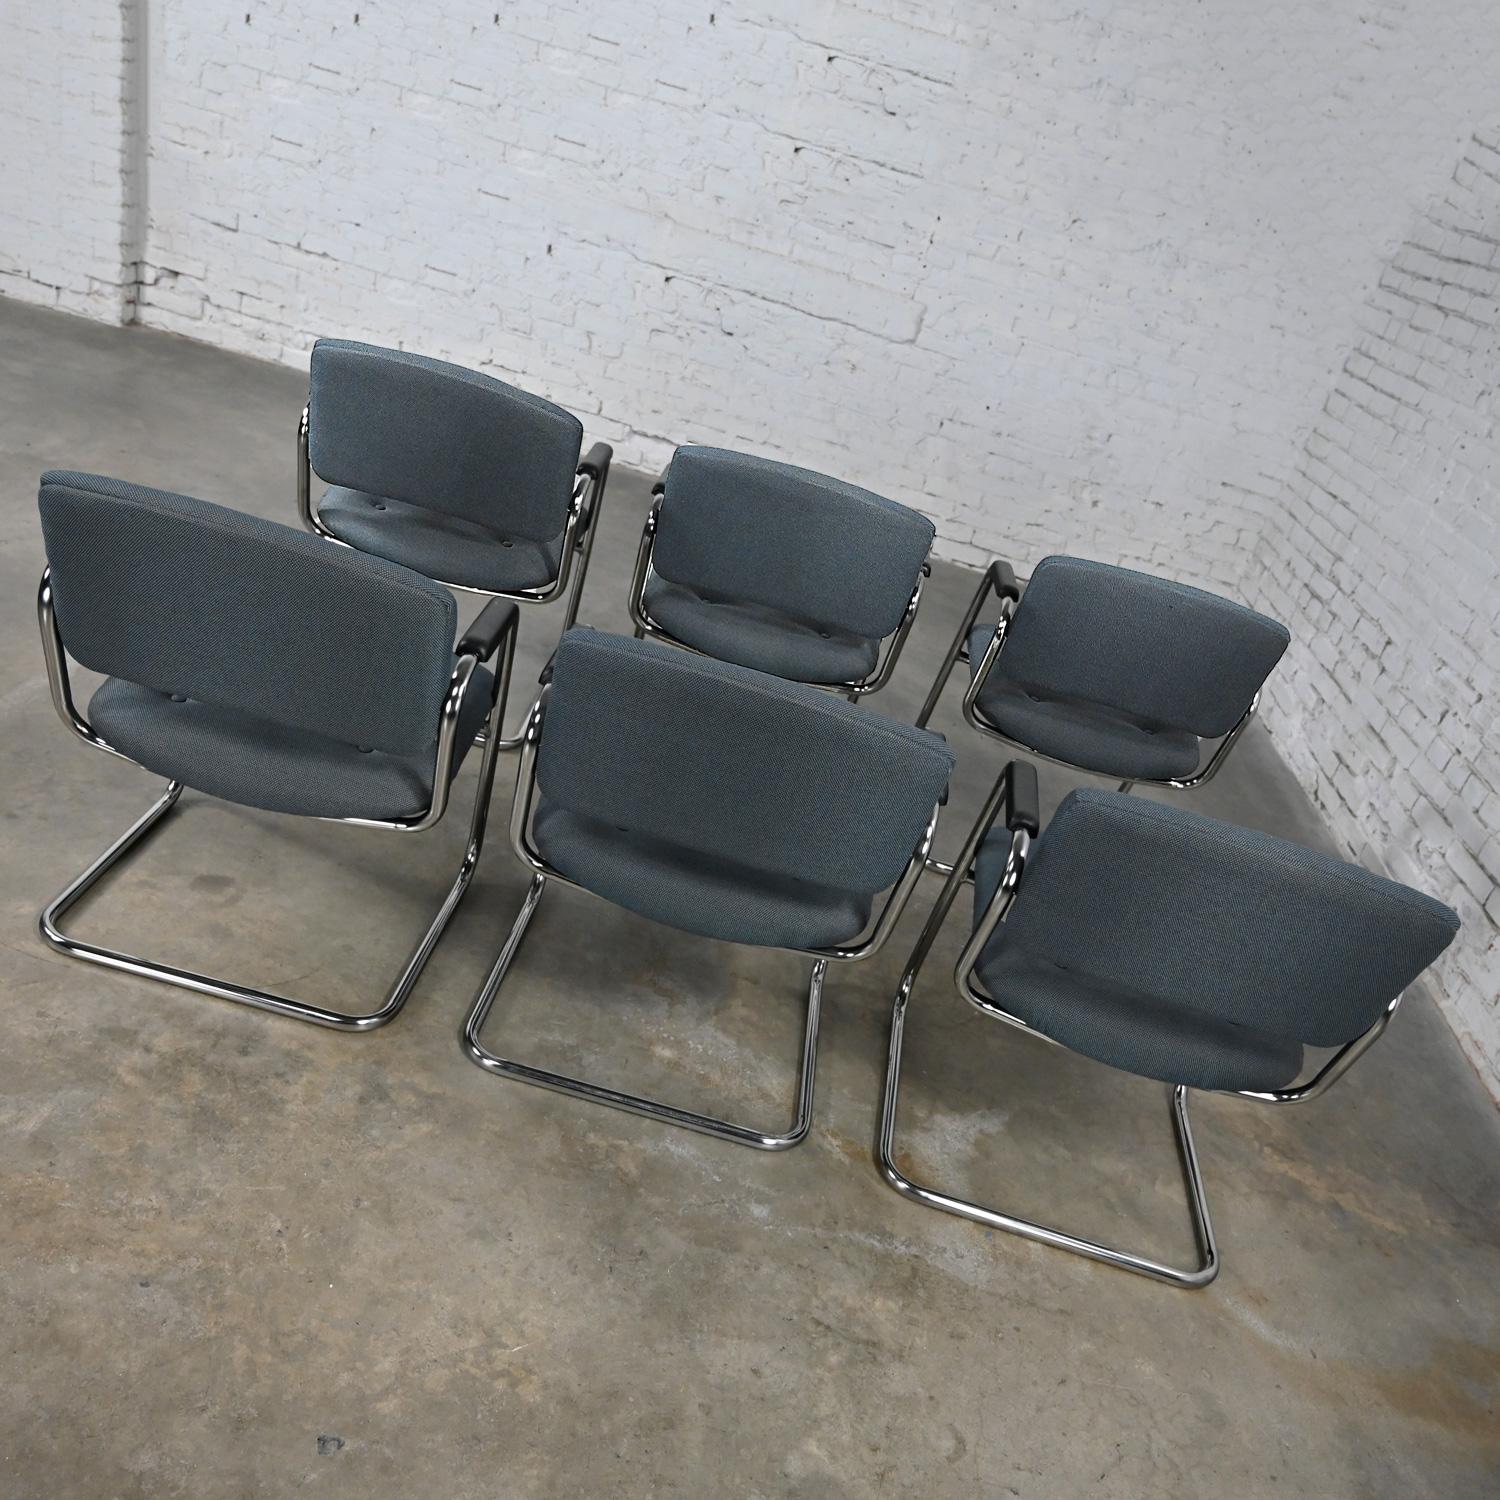 Late 20th Century Gray & Chrome Cantilever Chairs Style Steelcase Set of 6 For Sale 3